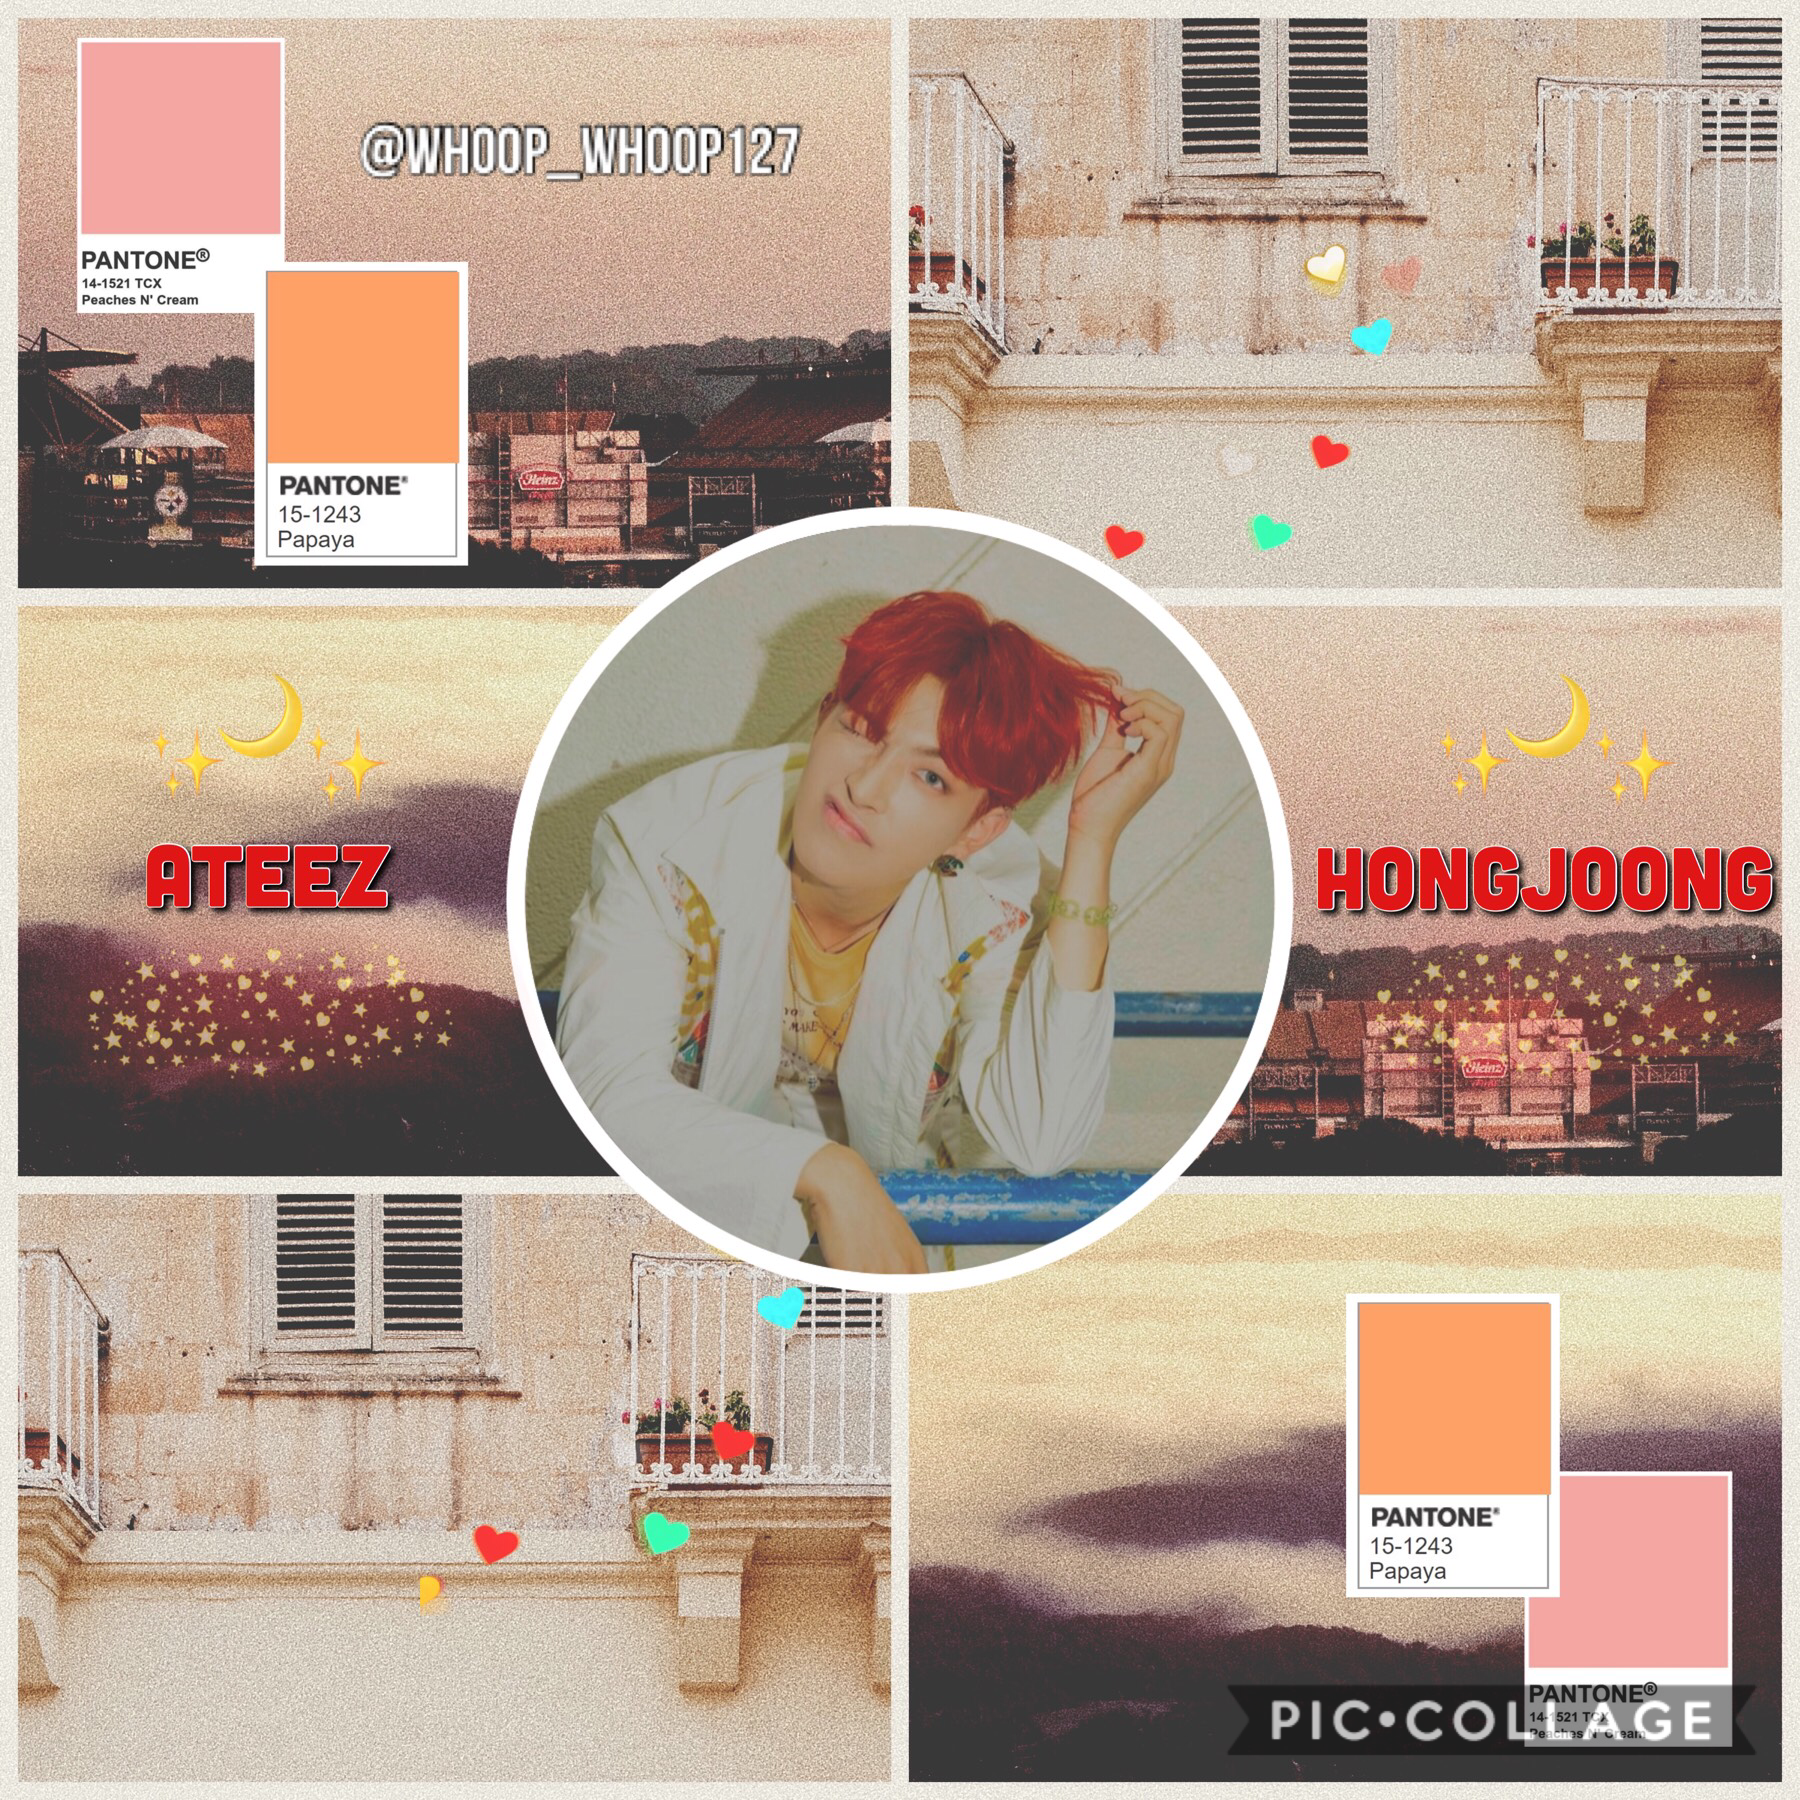 •🚒•
🍂Hongjoong~ Ateez🍂
Wow I posted🤯 Wonderland is an amazing song like wow 
Btw my icon is Hwang Yunseong he’s bae wàtch his fancams on YouTube thanks bye:)
